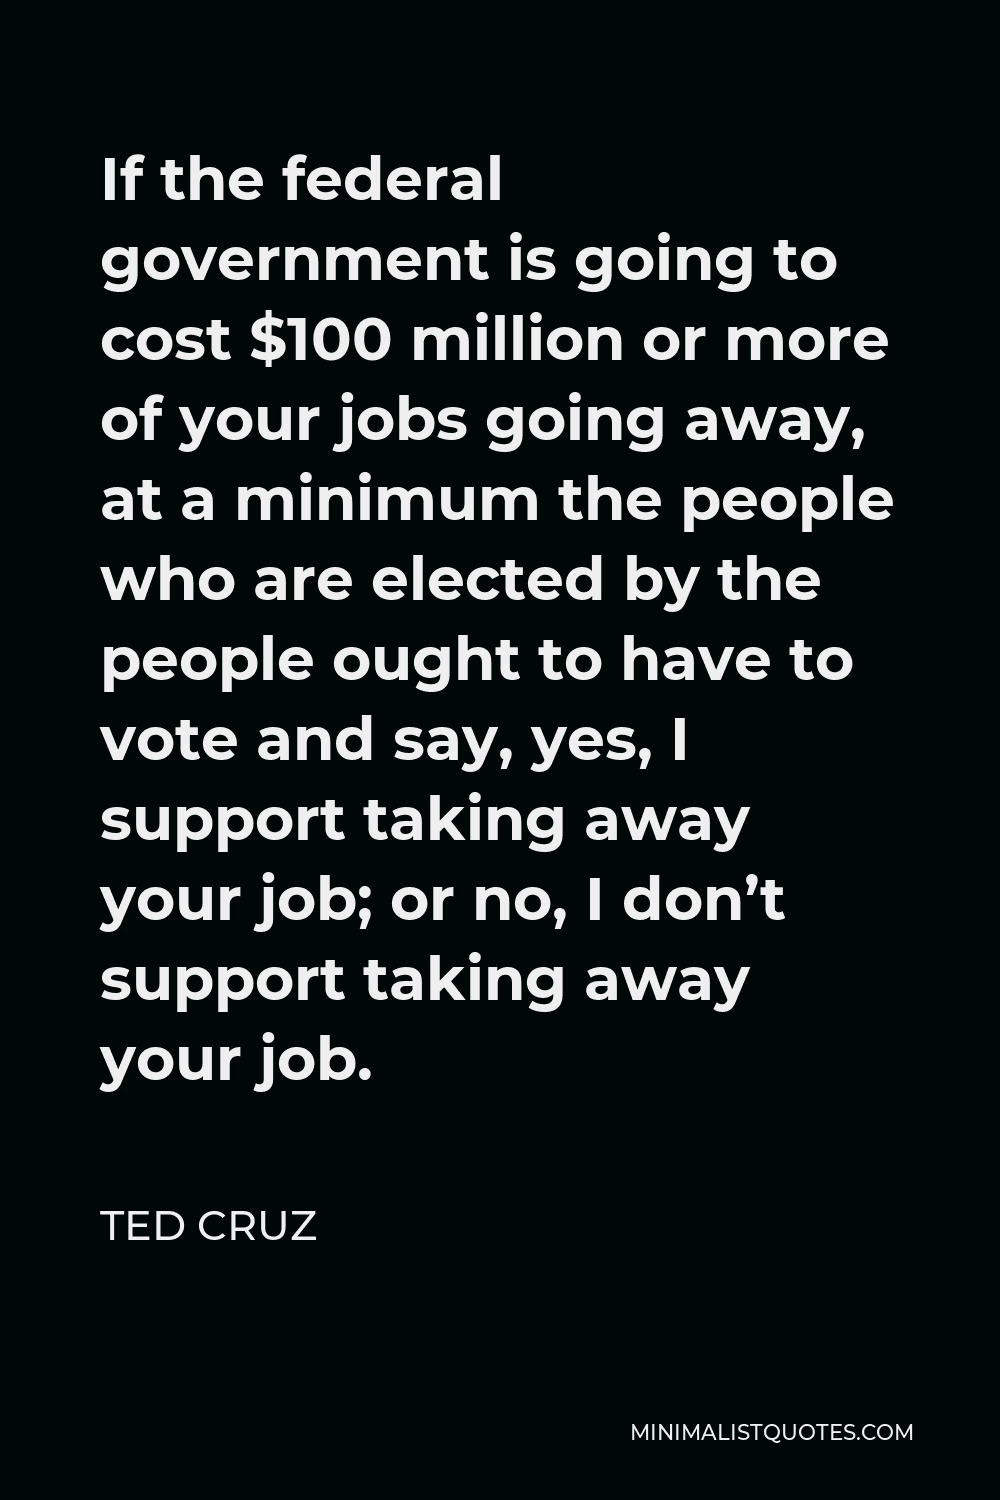 Ted Cruz Quote - If the federal government is going to cost $100 million or more of your jobs going away, at a minimum the people who are elected by the people ought to have to vote and say, yes, I support taking away your job; or no, I don’t support taking away your job.